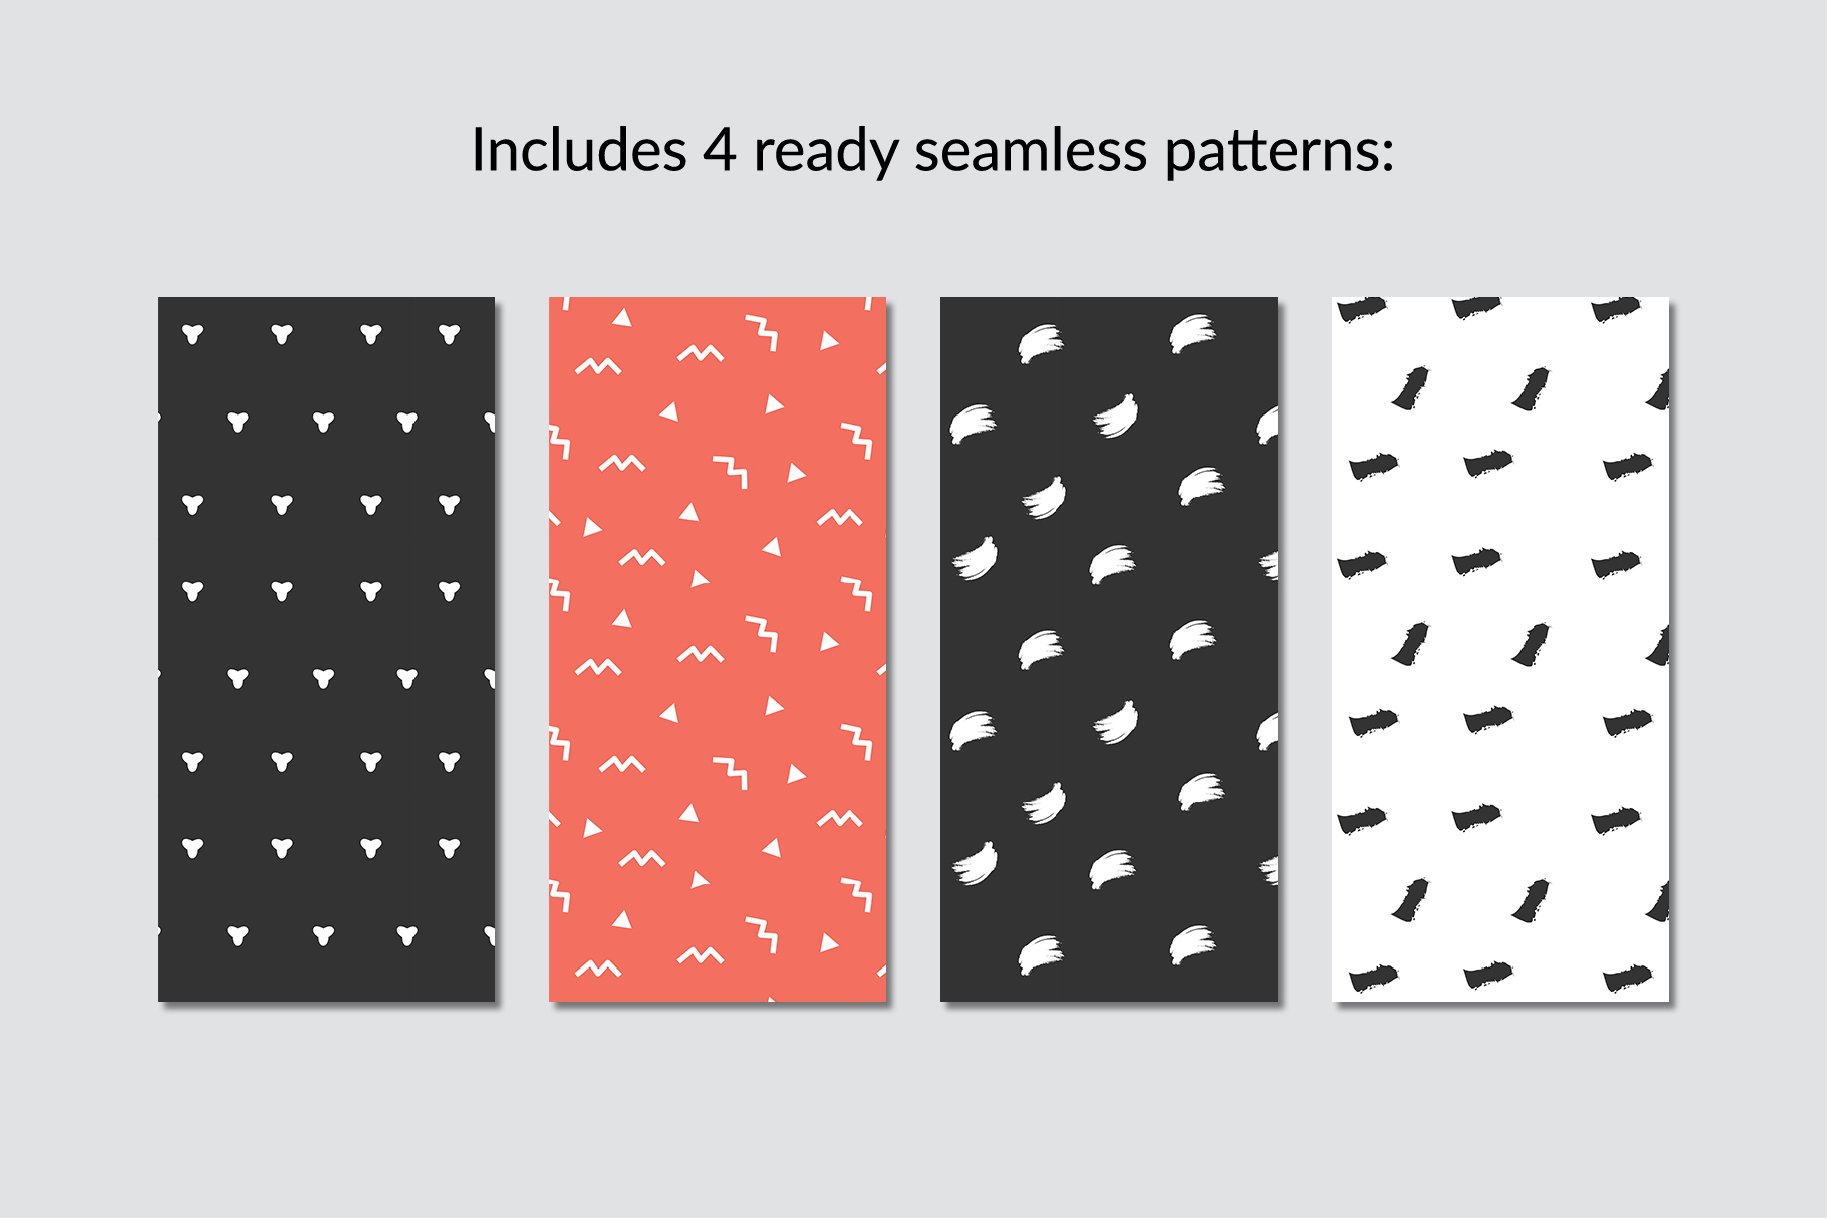 It includes 4 ready seamless patterns.